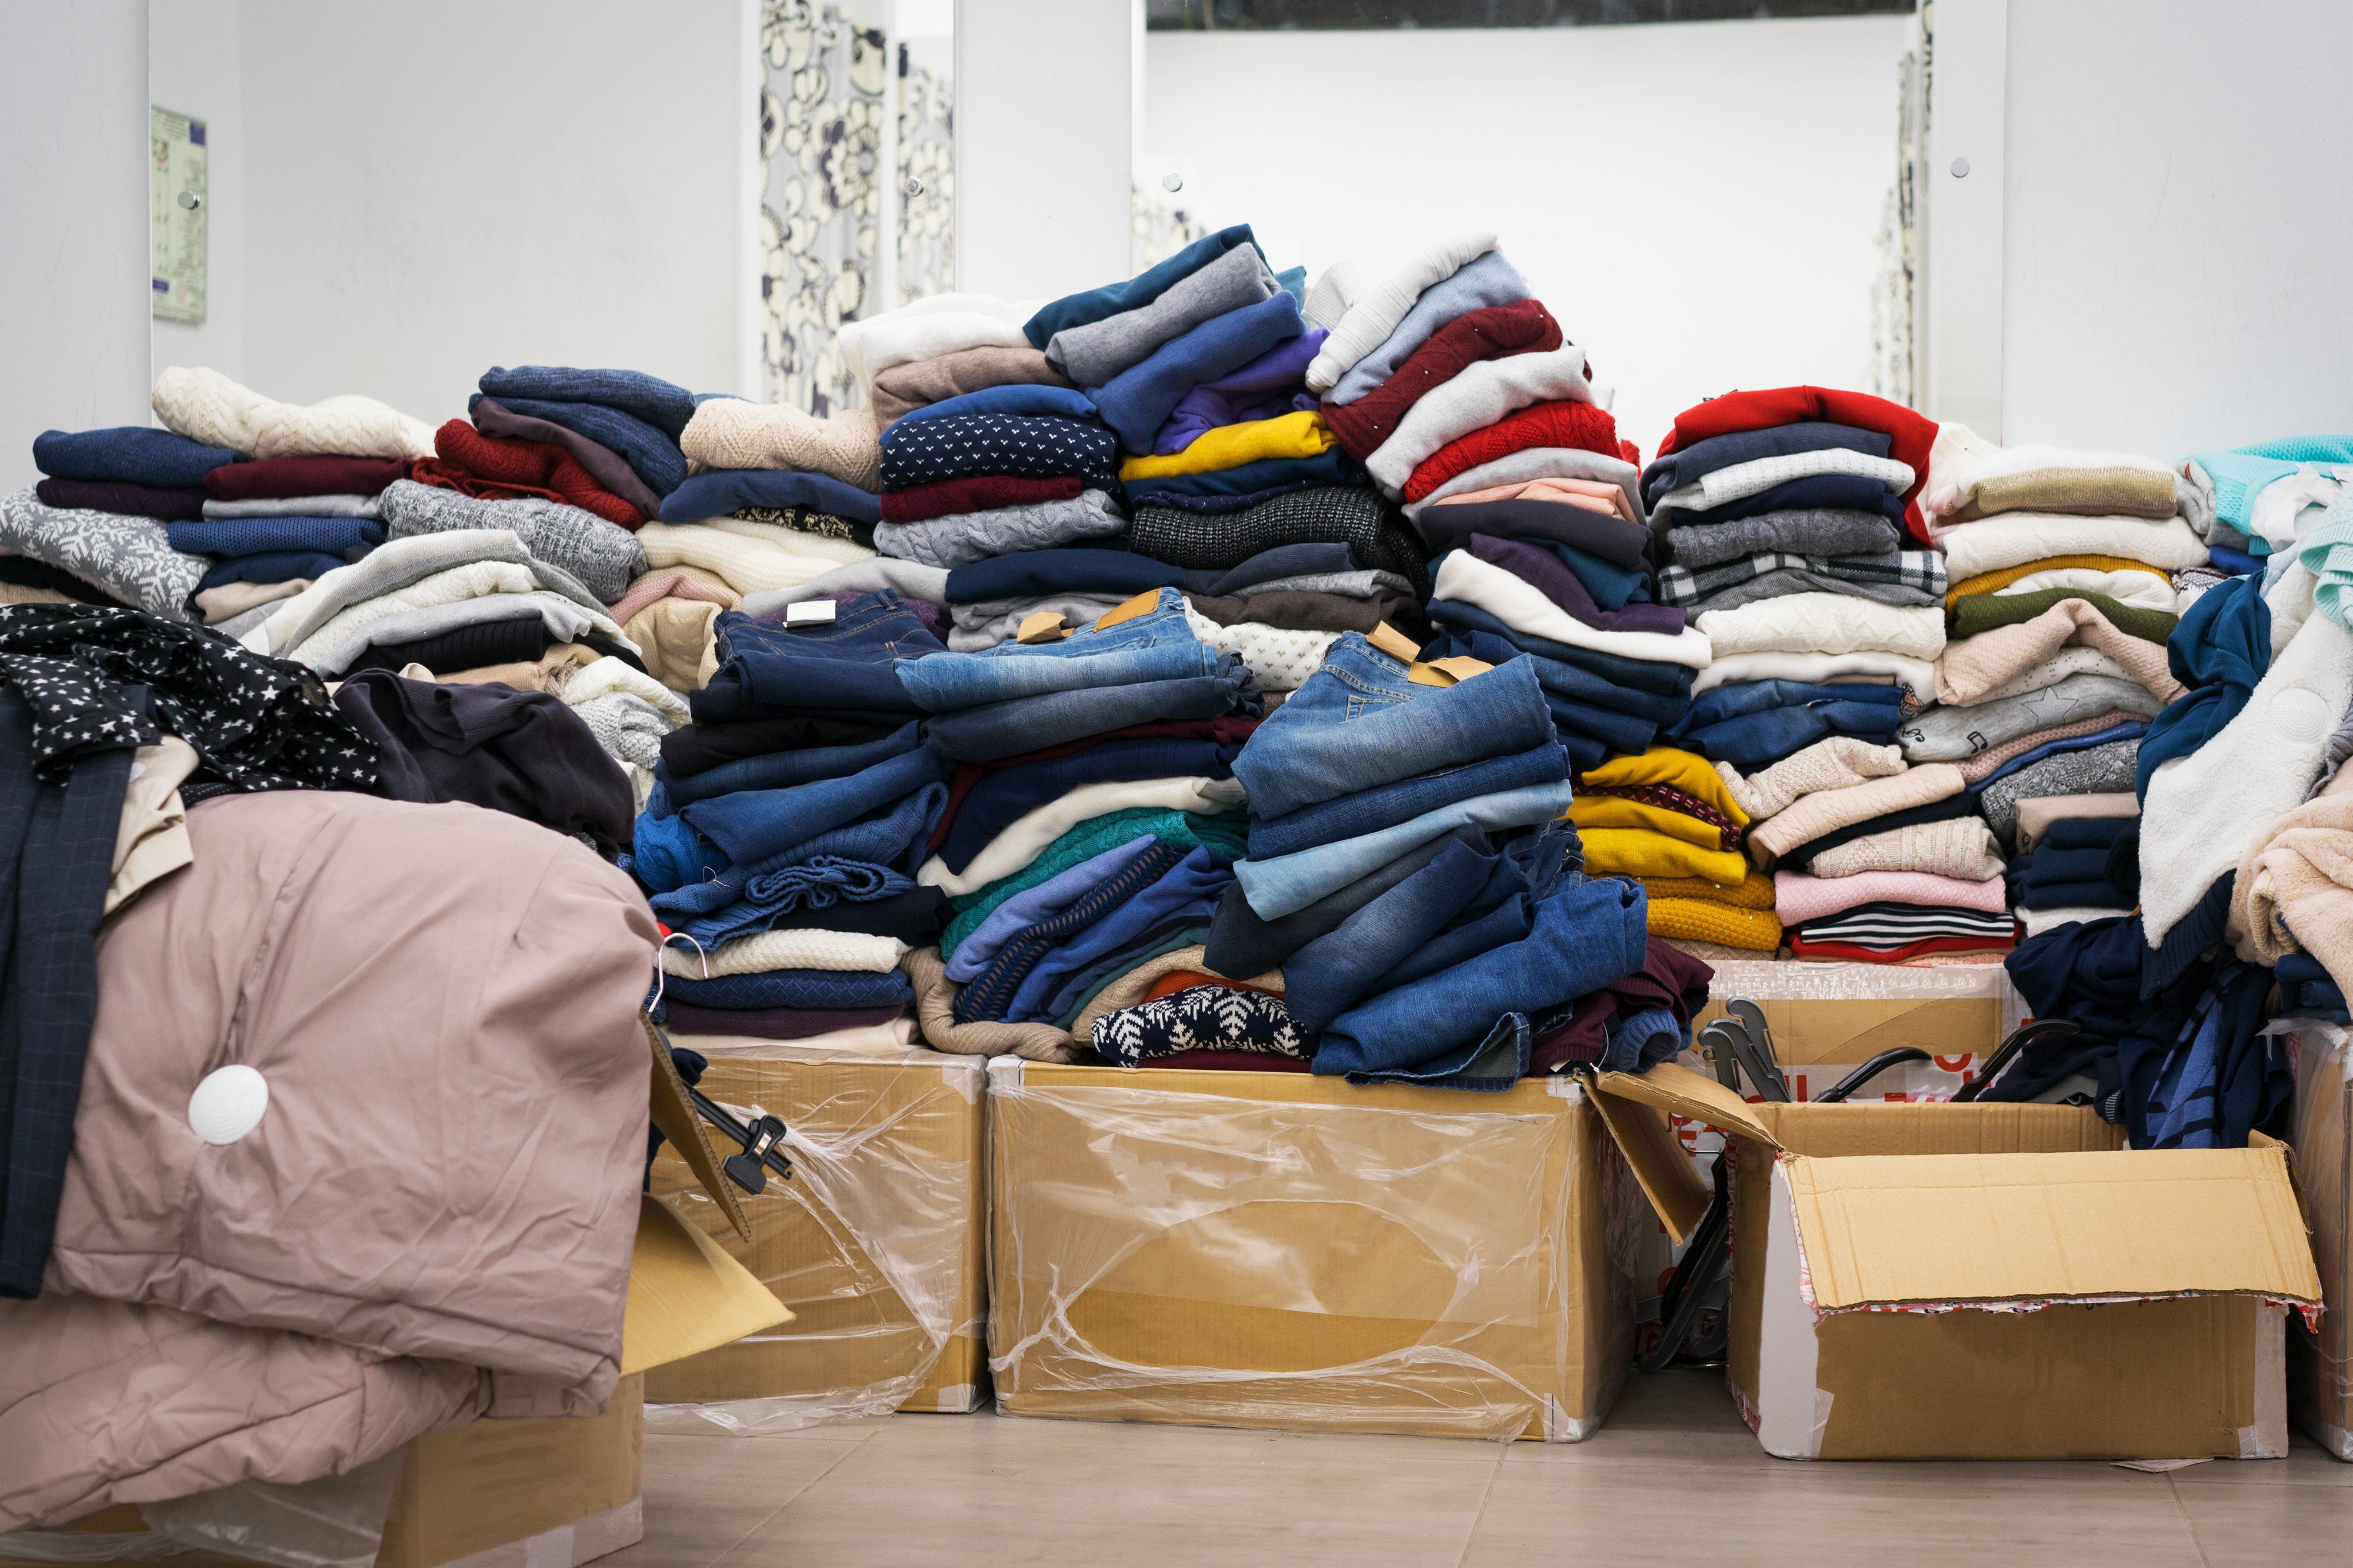 Fashion industry must get its waste management in order